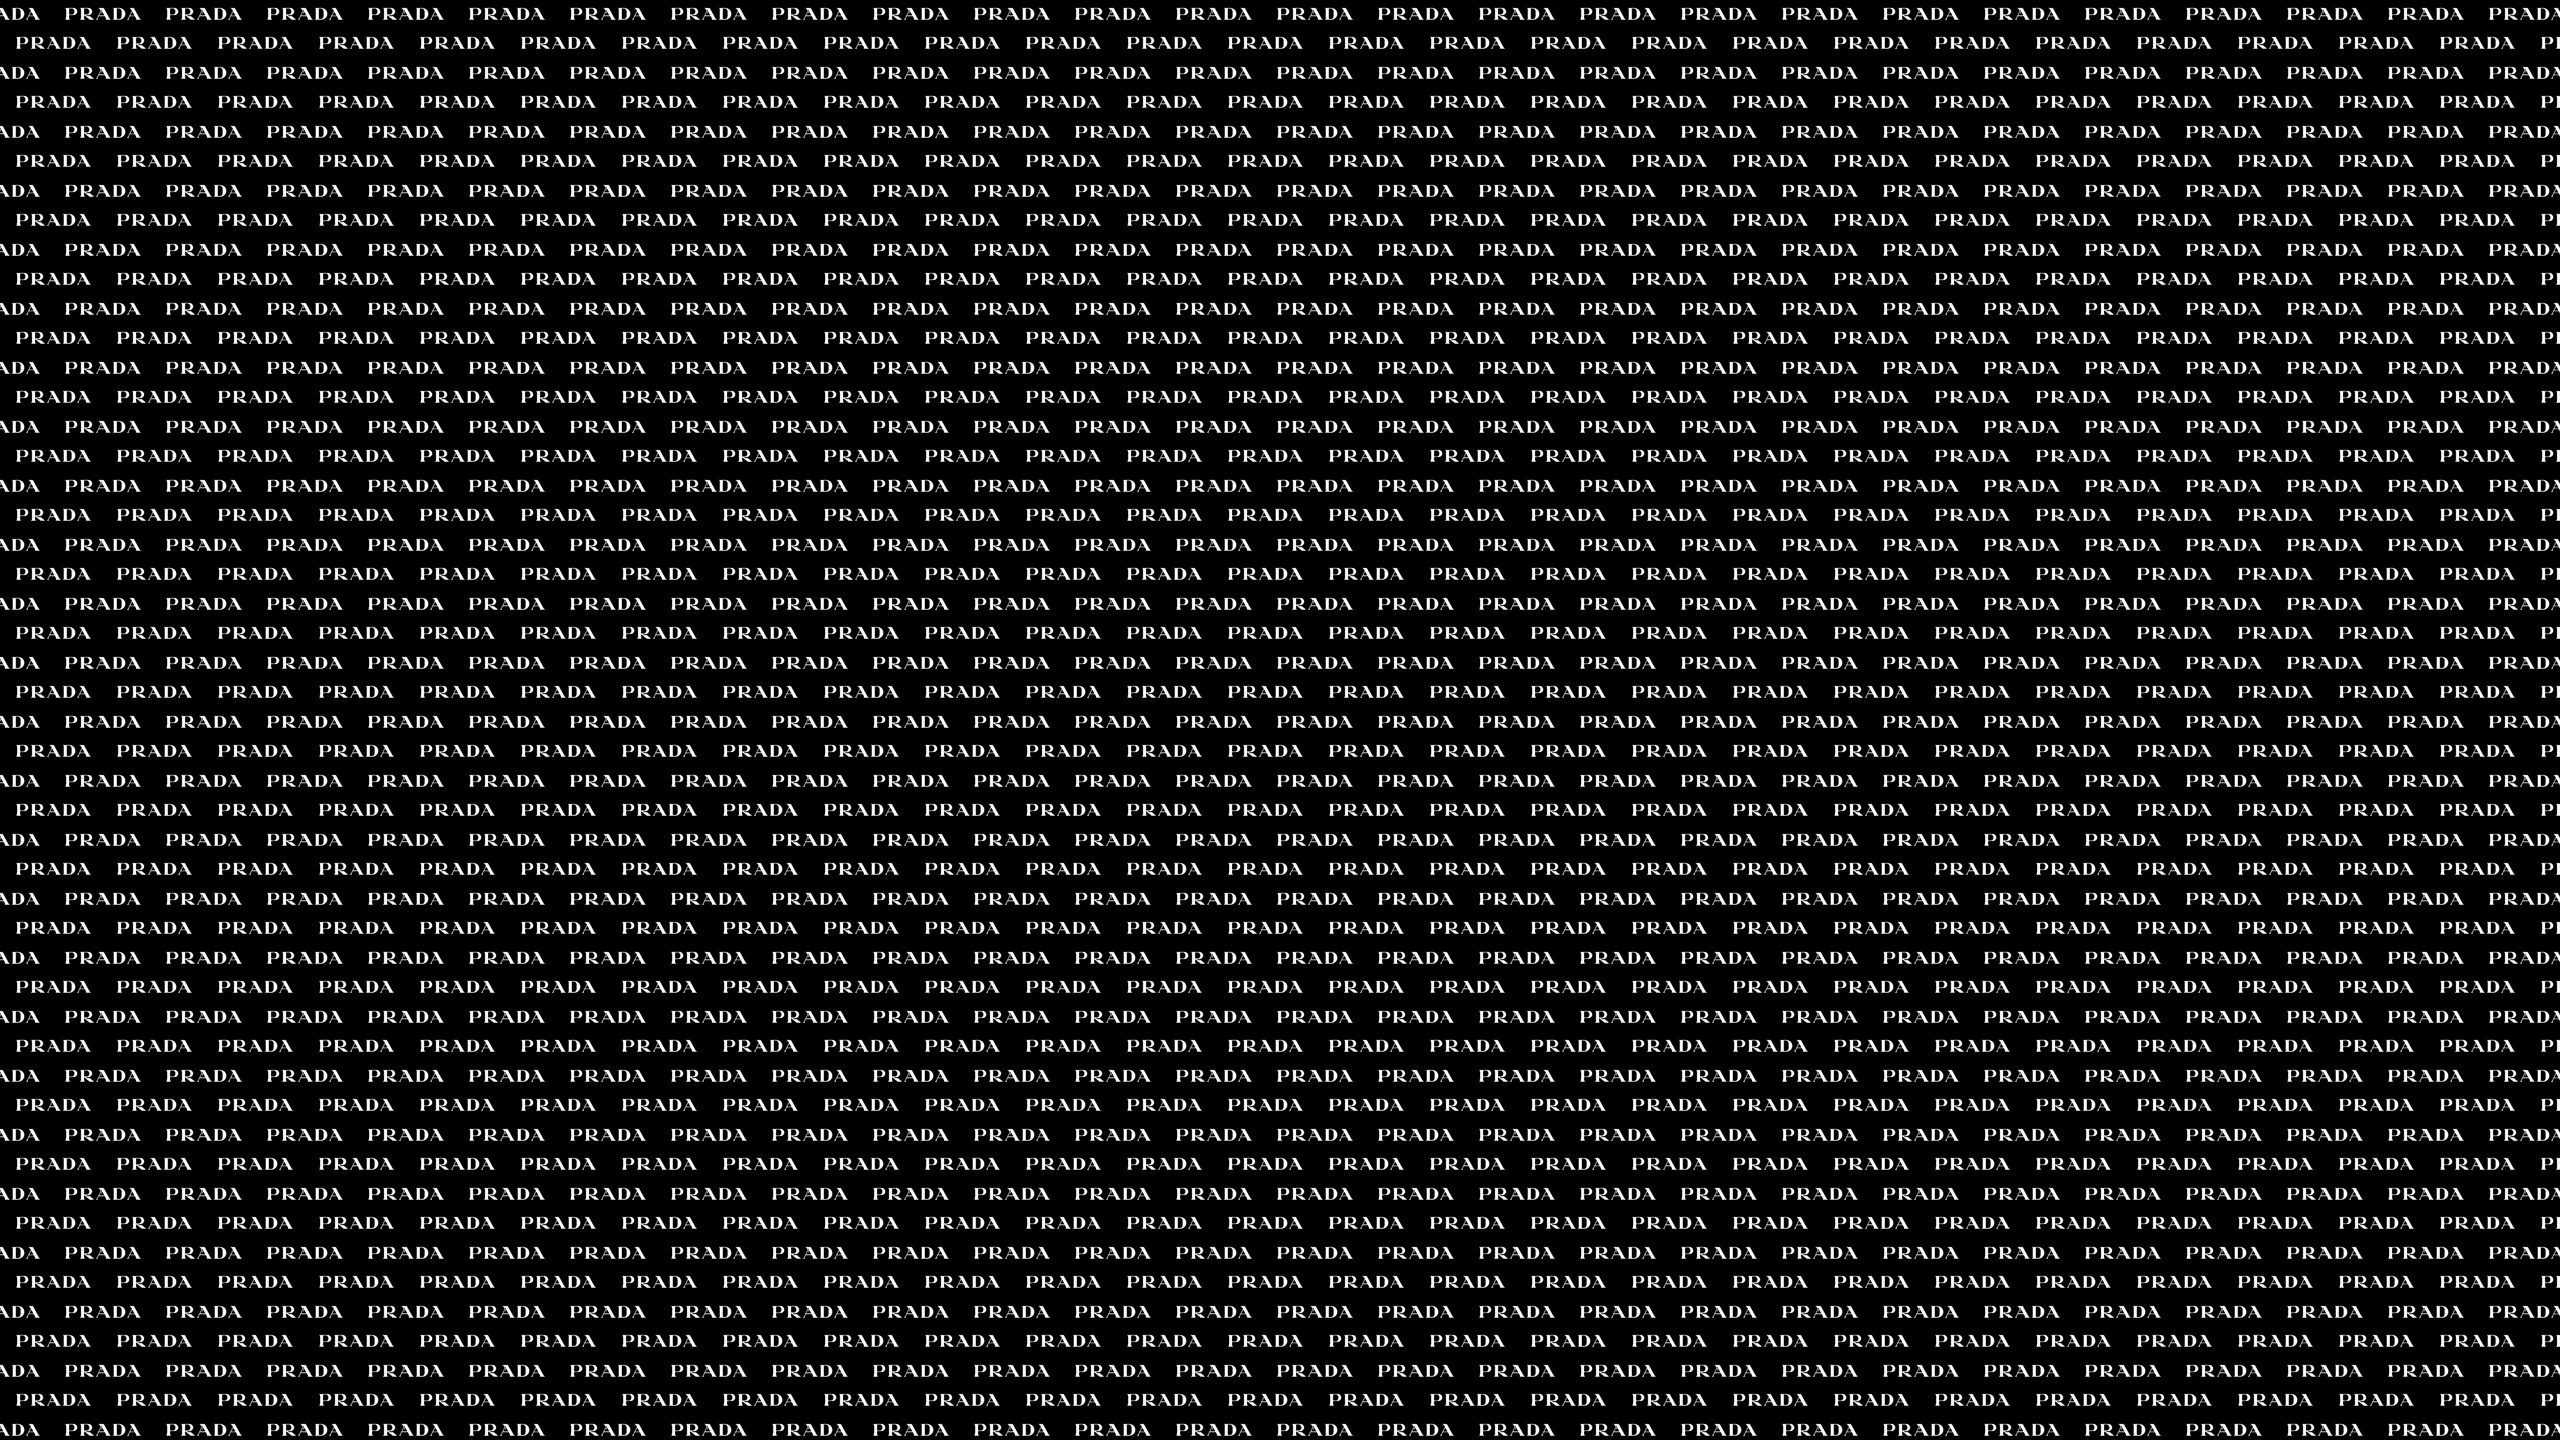 Prada: One of the most iconic brands in fashion history, Pattern, Black and white. 2560x1440 HD Background.